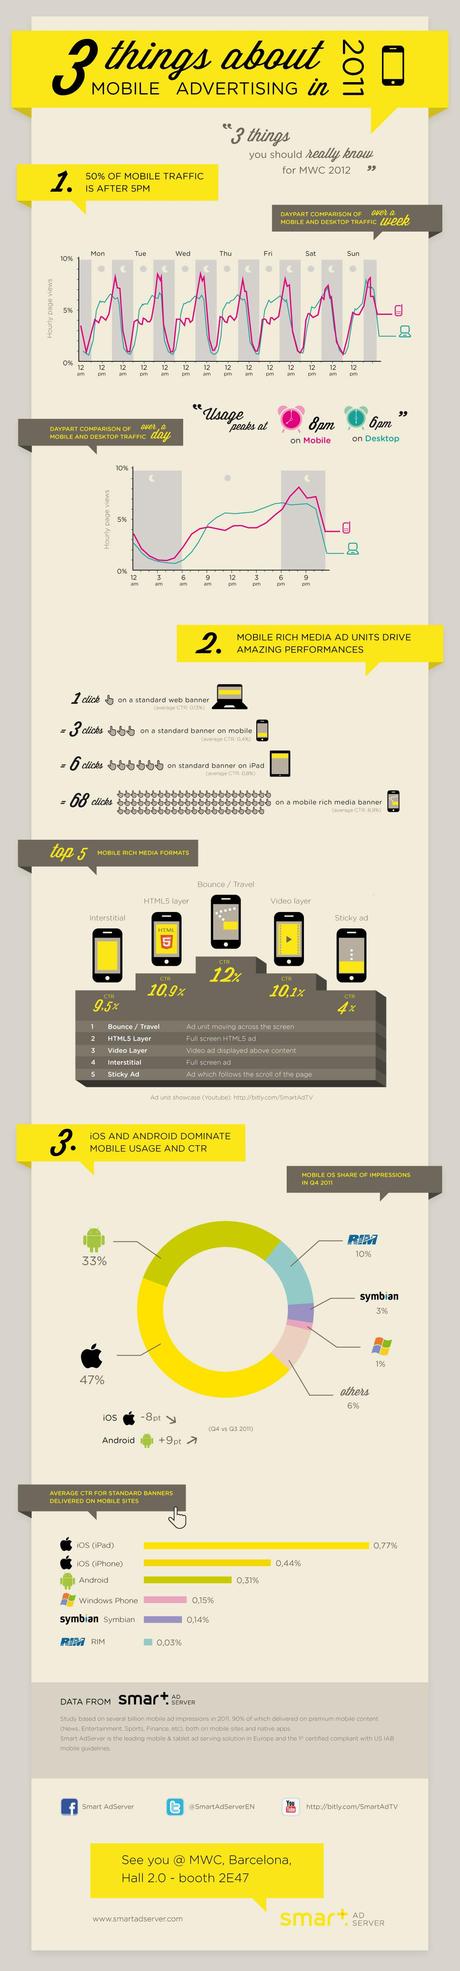 3 things you should really know for MWC 2012 [INFOGRAPHIC]